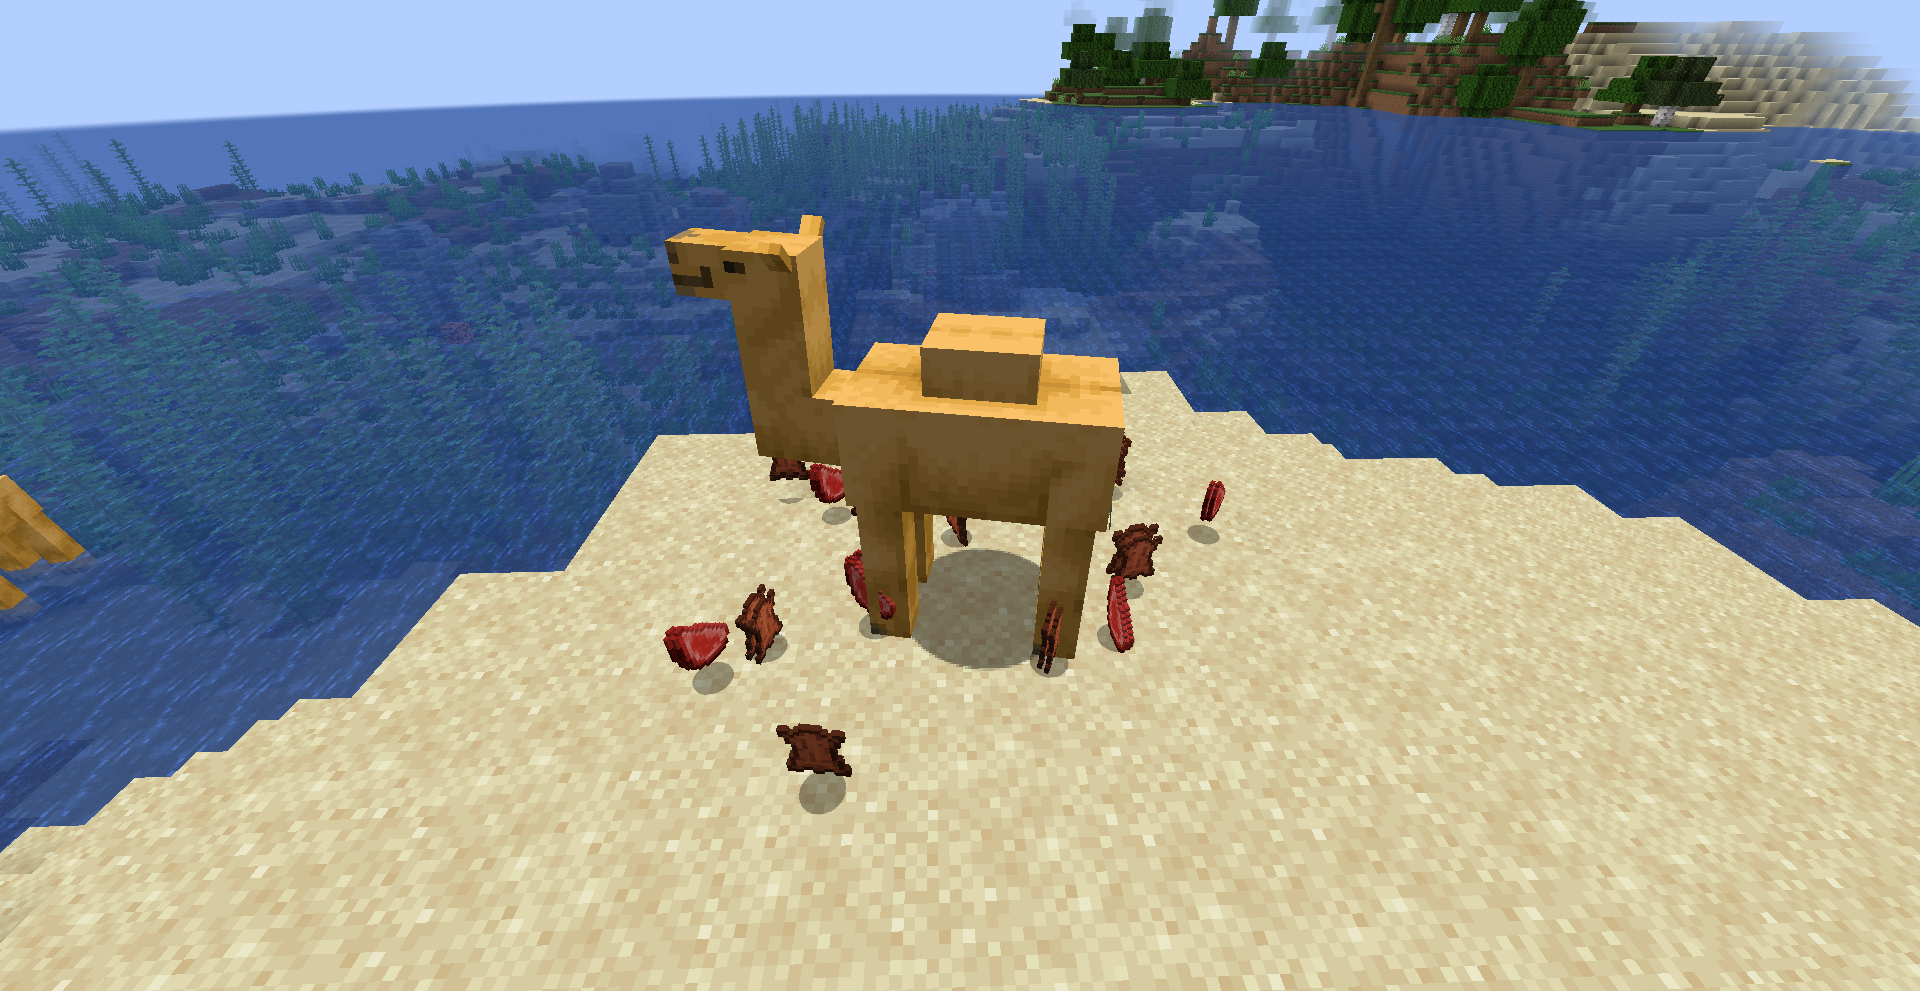 A camel surrounded by camel meat.

